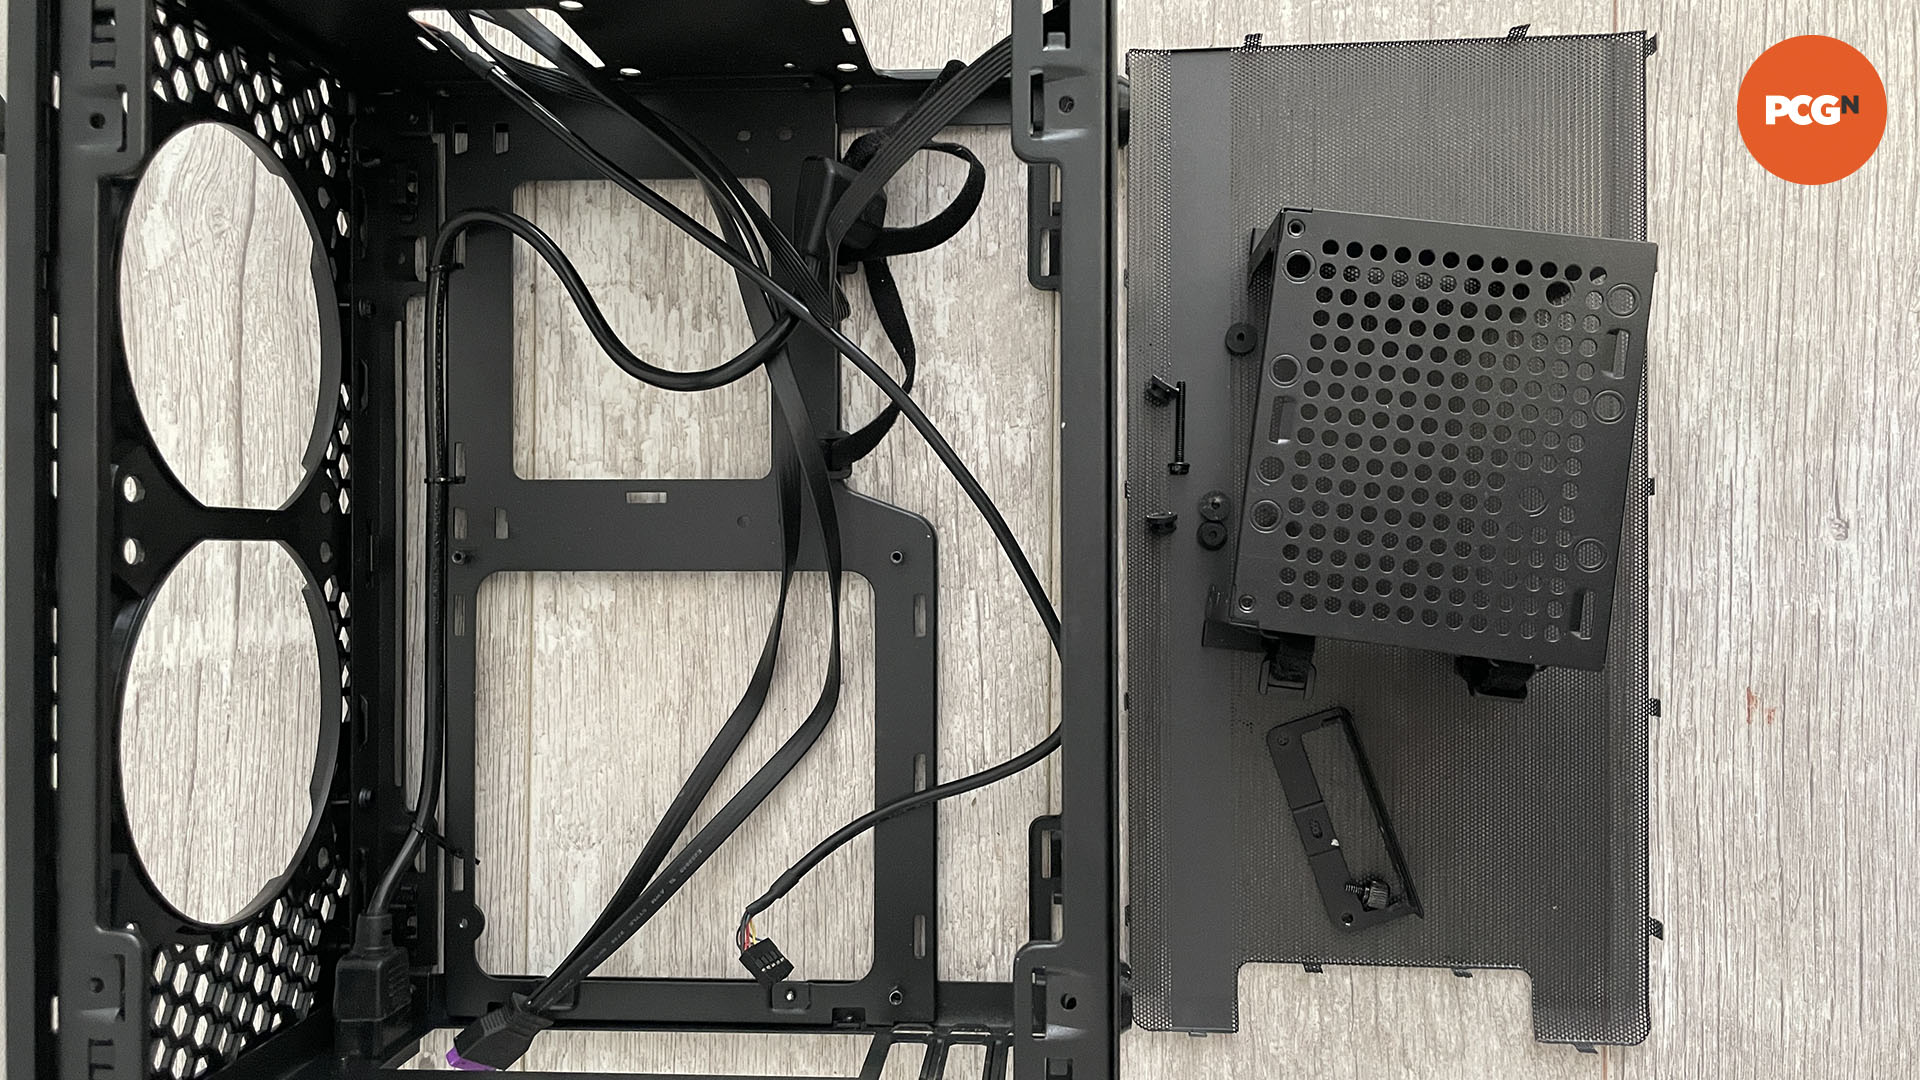 How to move the motherboard tray in your PC case: Remove fixtures and fittings